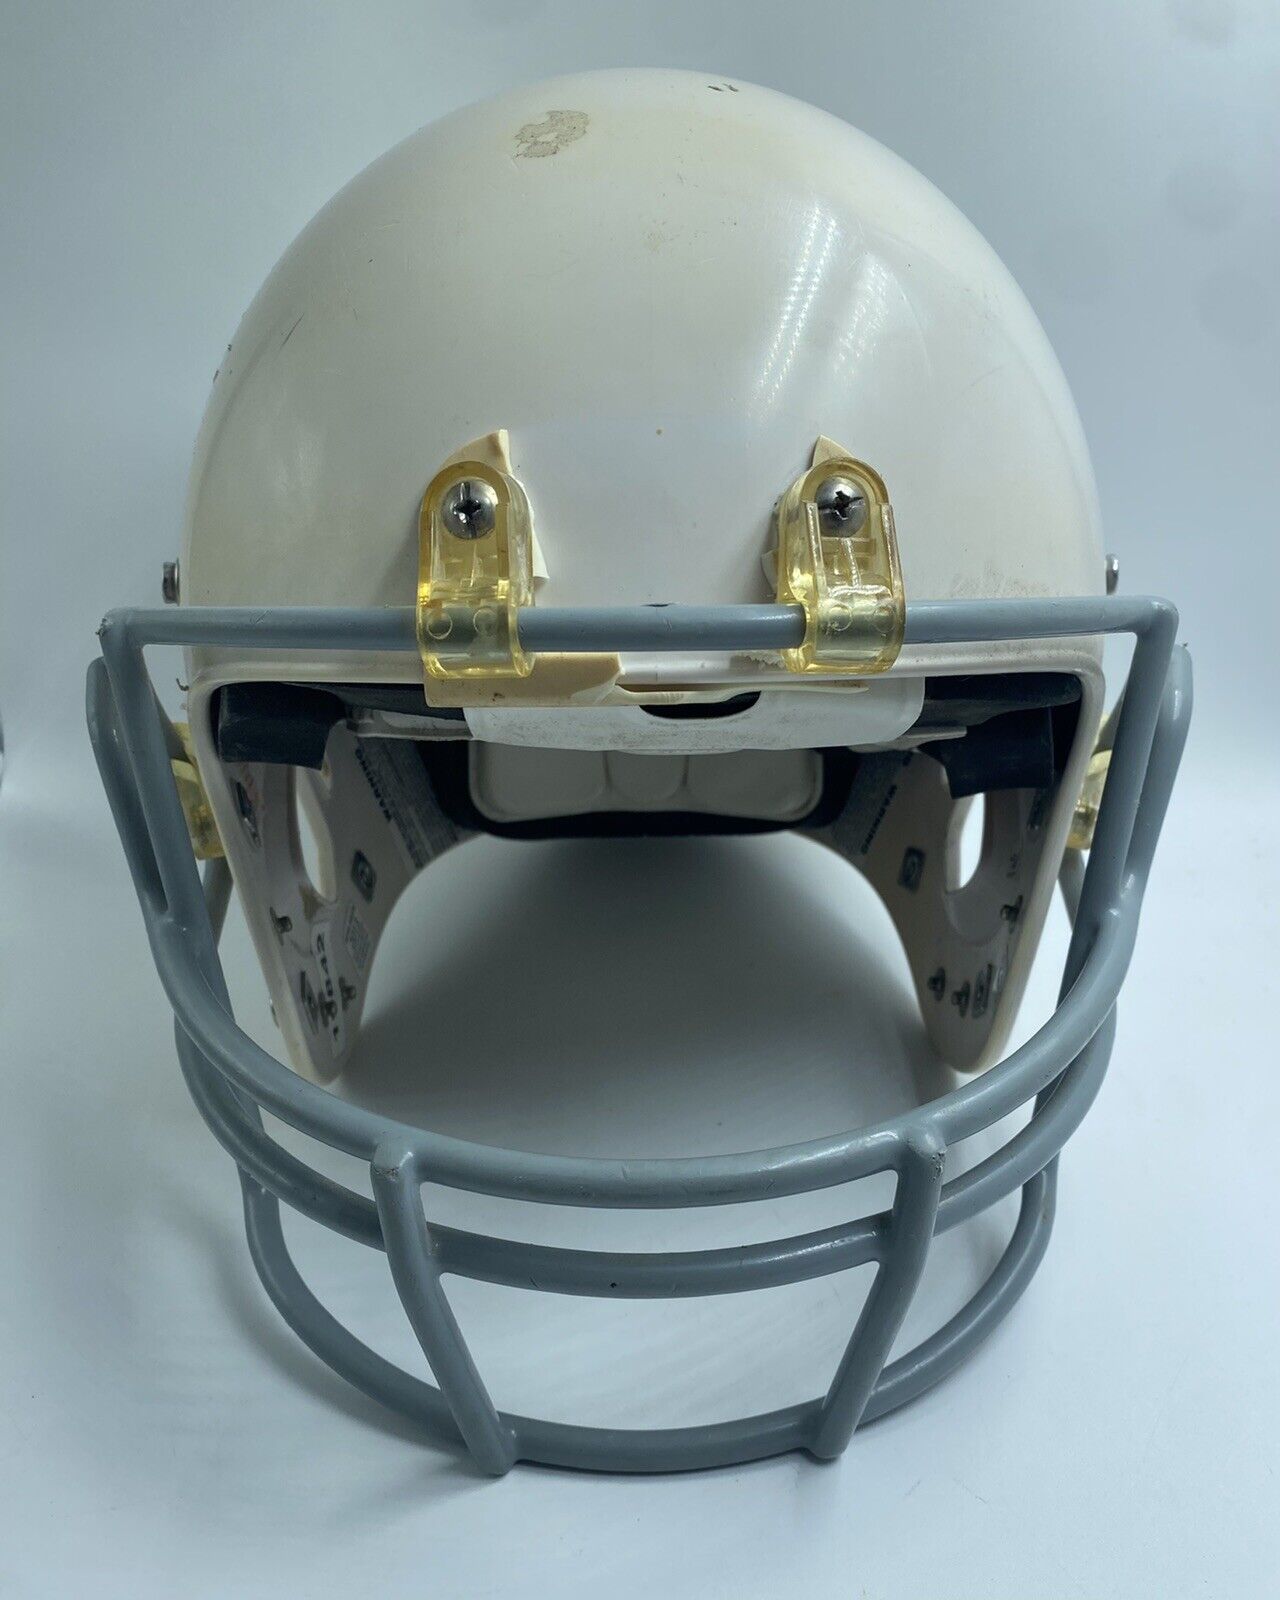 Riddell Youth Small 2013 white helmet Recertified 2015 - SHIPS FAST - READ